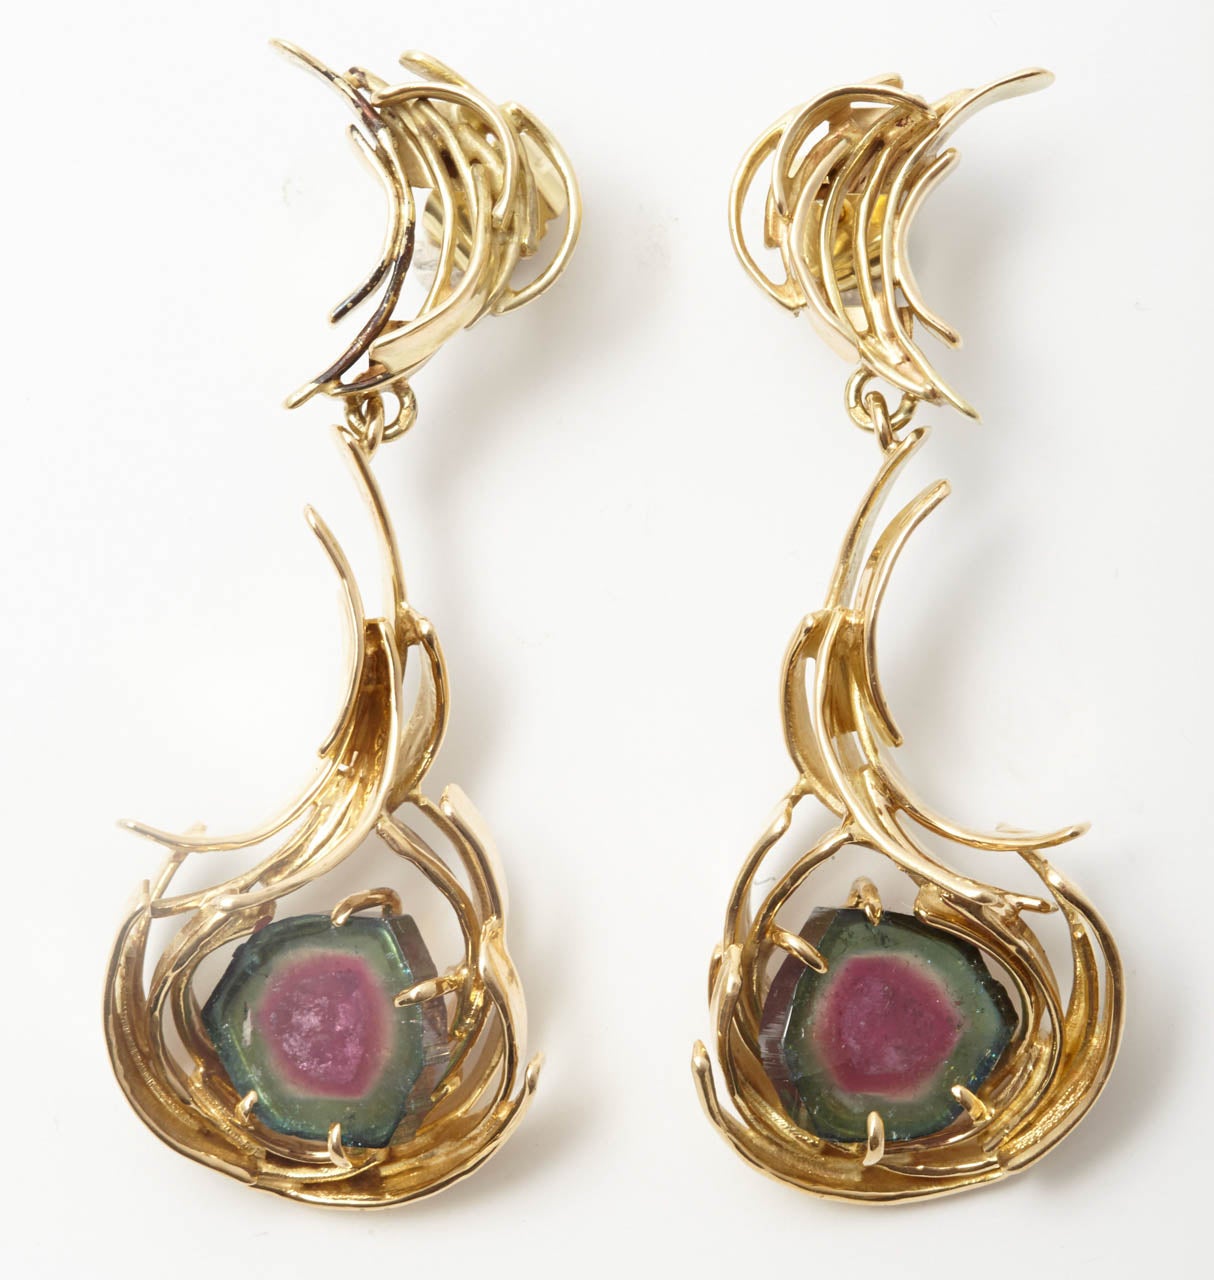 A pair of gold, tourmaline earrings by Anneke Schat
Each designed as a free form of 14K yellow gold curved bars, highlighted by a water melon tourmaline plaque to the centre. Signed Anneke Schat.

All of our prices exclude VAT.